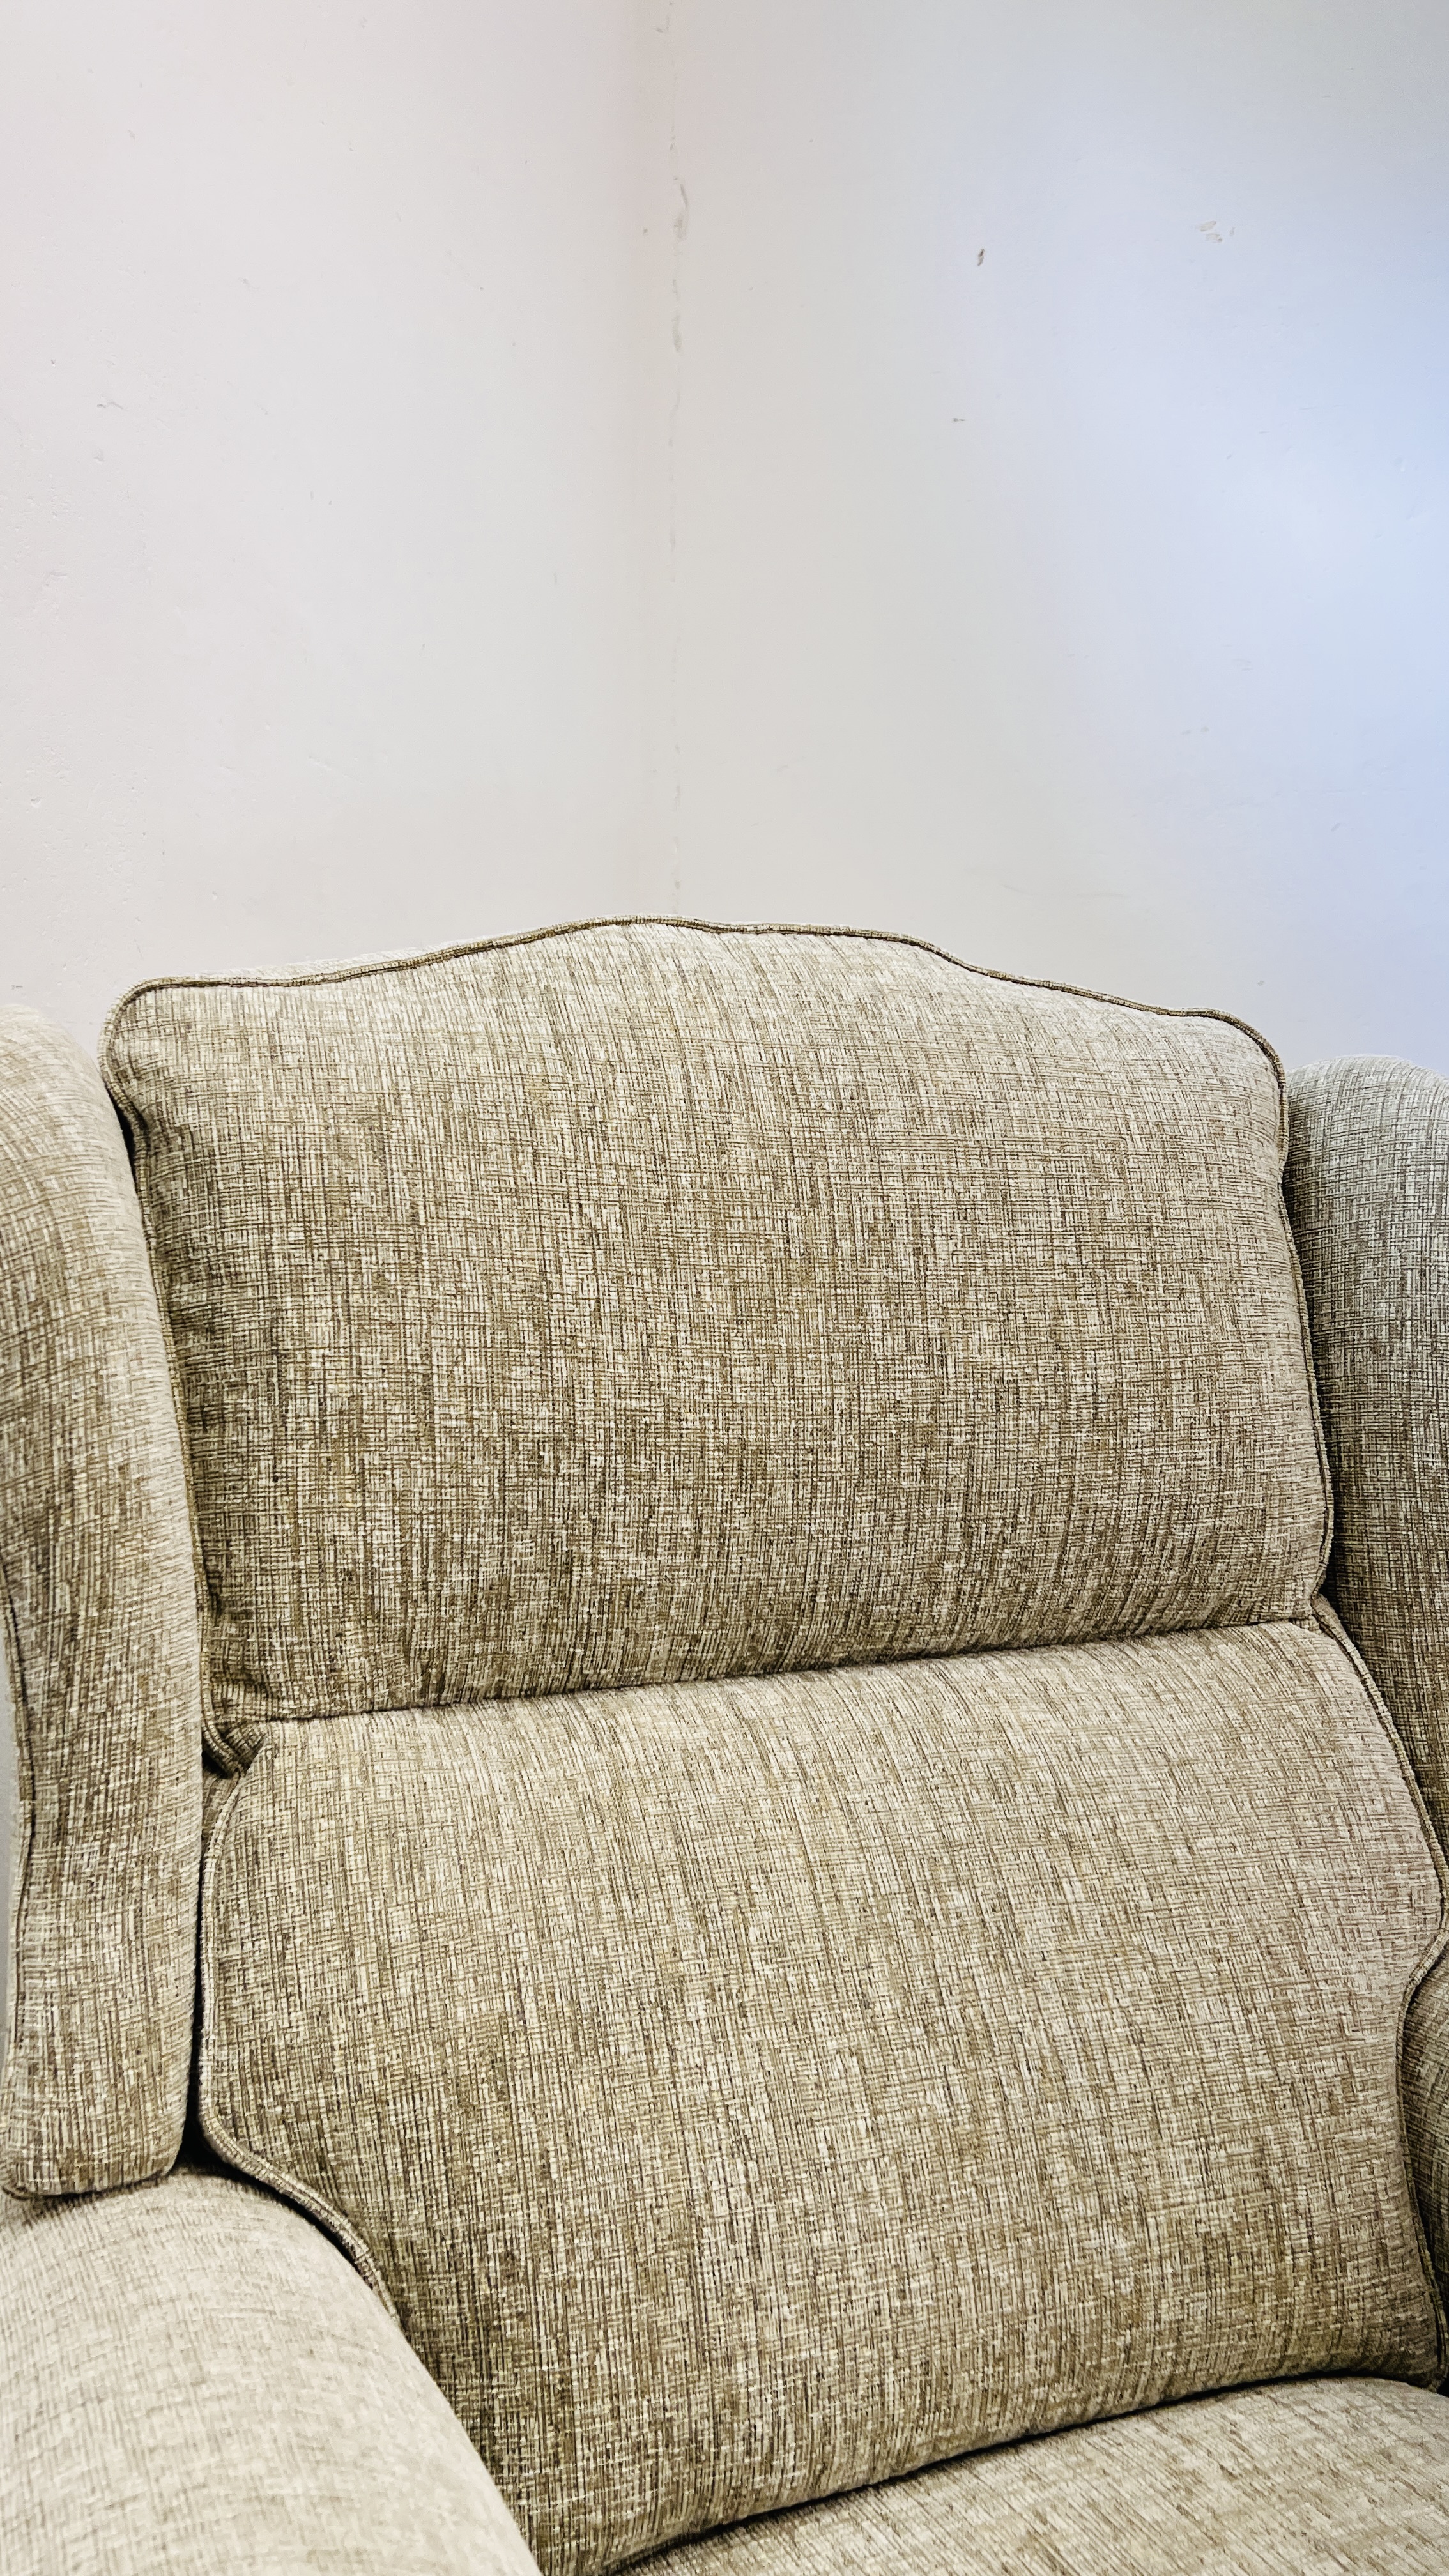 A GOOD QUALITY "SHERBORNE" TWO SEATER SOFA W 140CM X D 82CM X H 94CM ALONG WITH A MATCHING ARMCHAIR. - Image 14 of 14